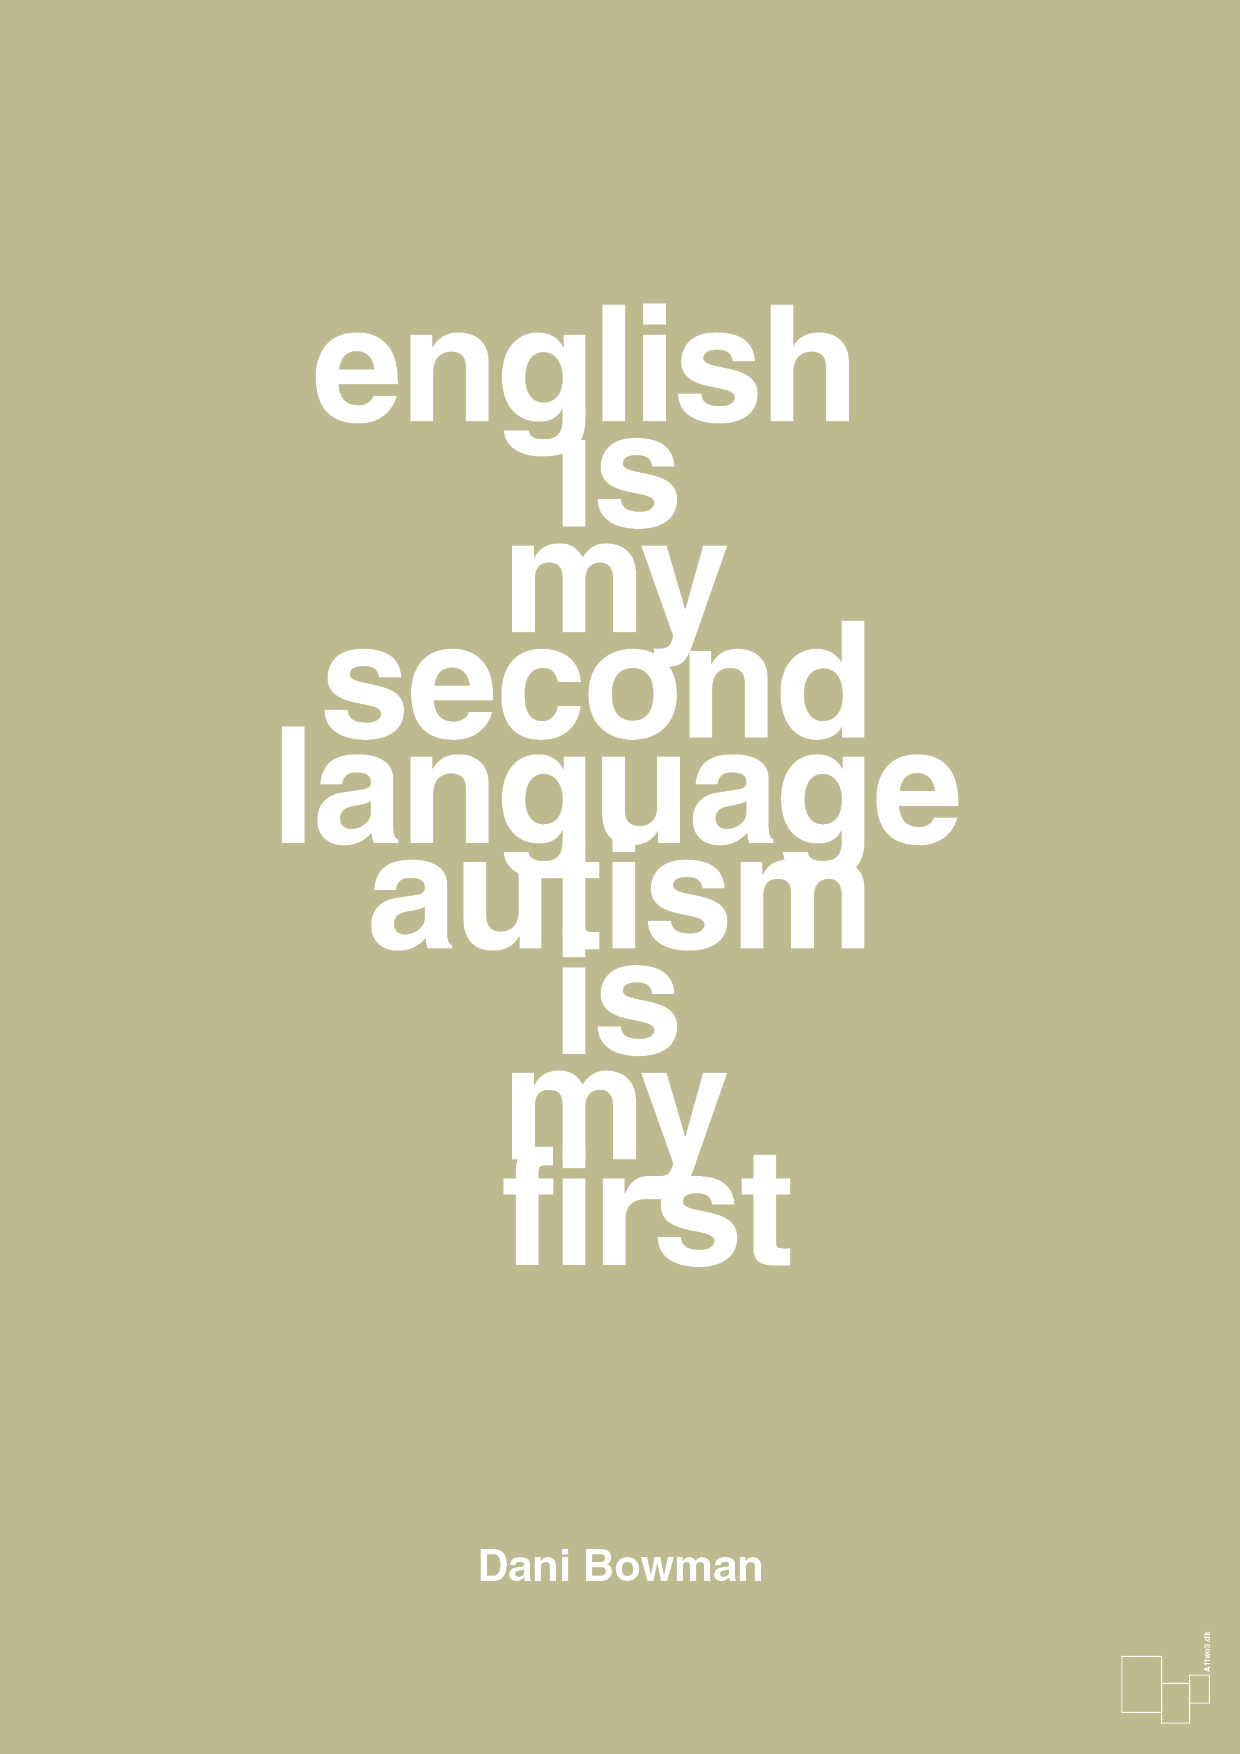 english is my second language autism is my first - Plakat med Samfund i Back to Nature